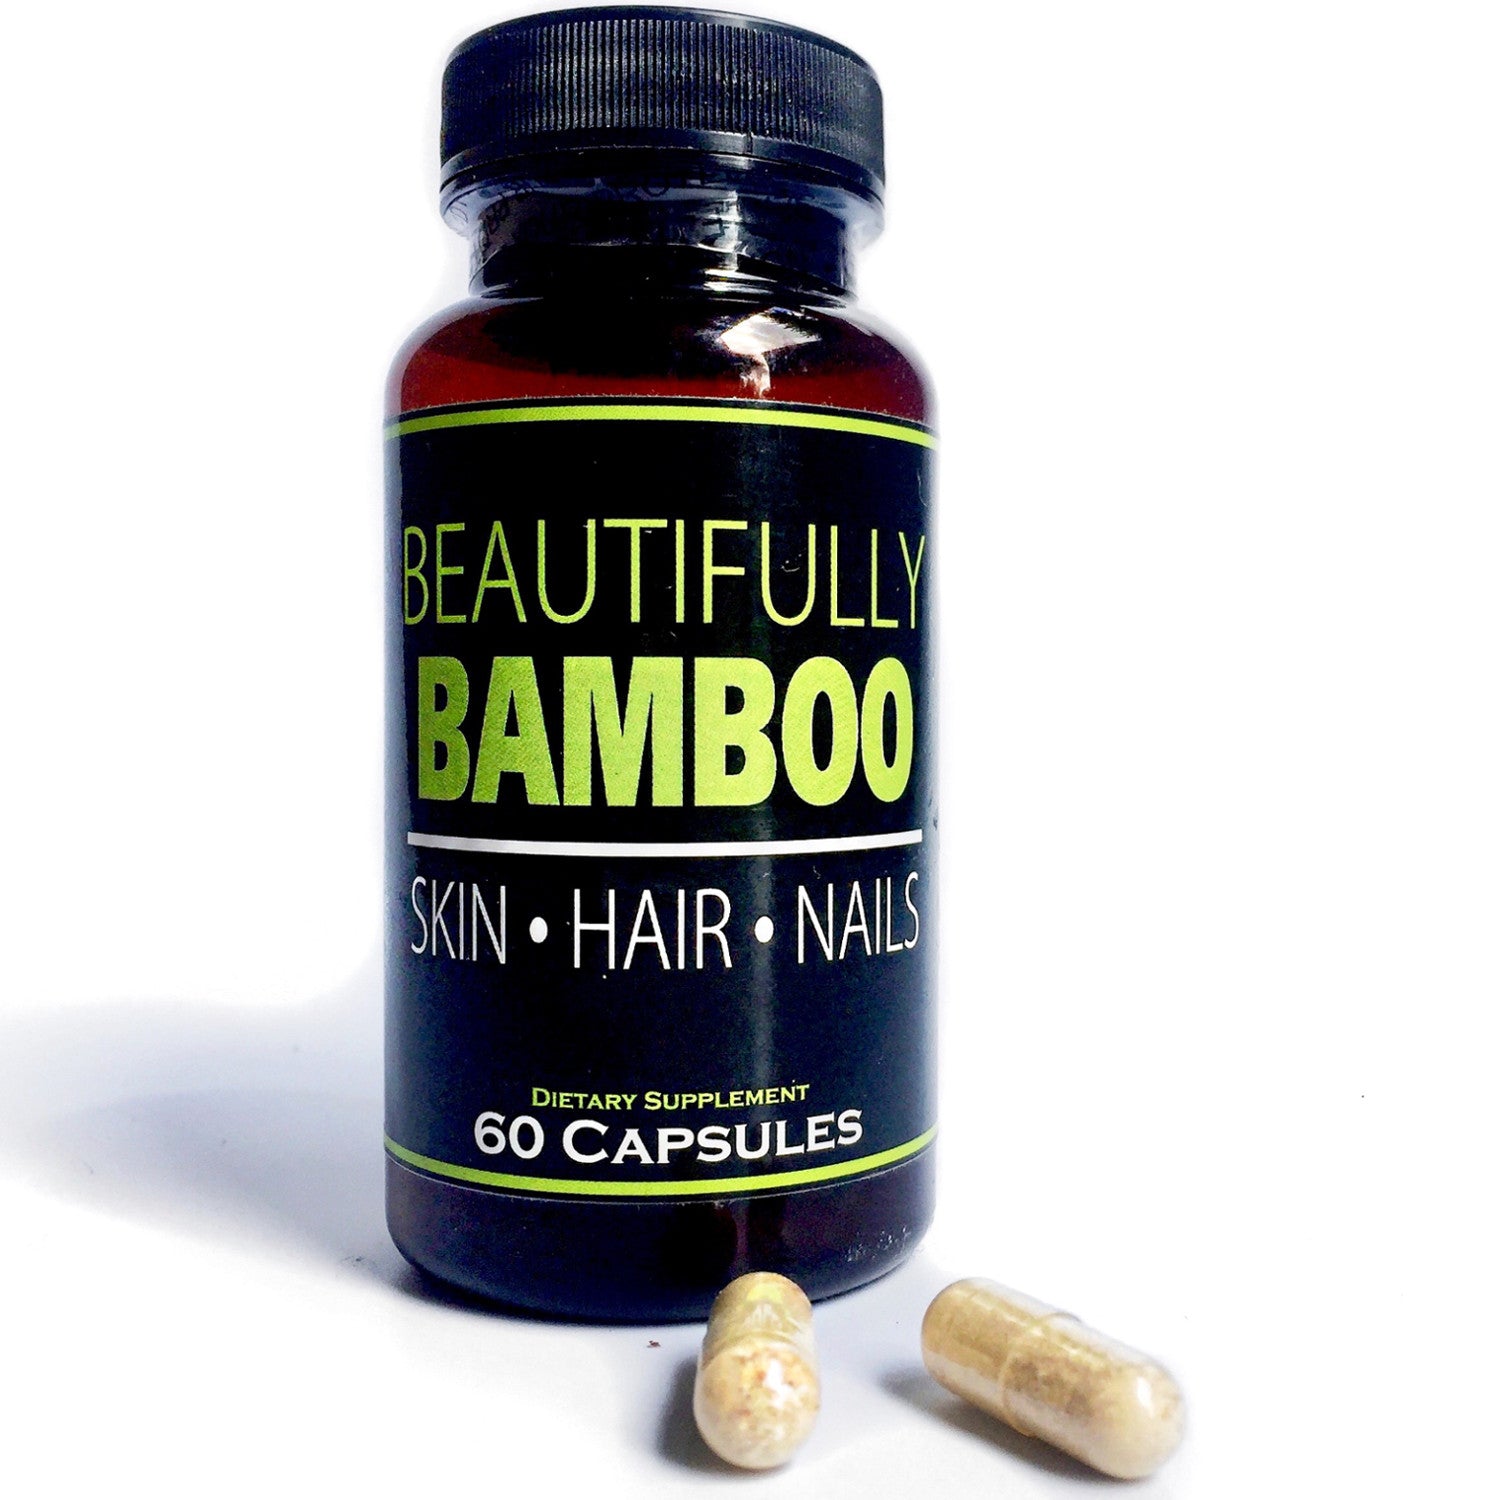 Beautifully Bamboo Ultra Vitamin for Skin, Hair, and Nail Growth. Enriched with Biotin, Bamboo Silica, Amino Acids and More (60 Capsules)